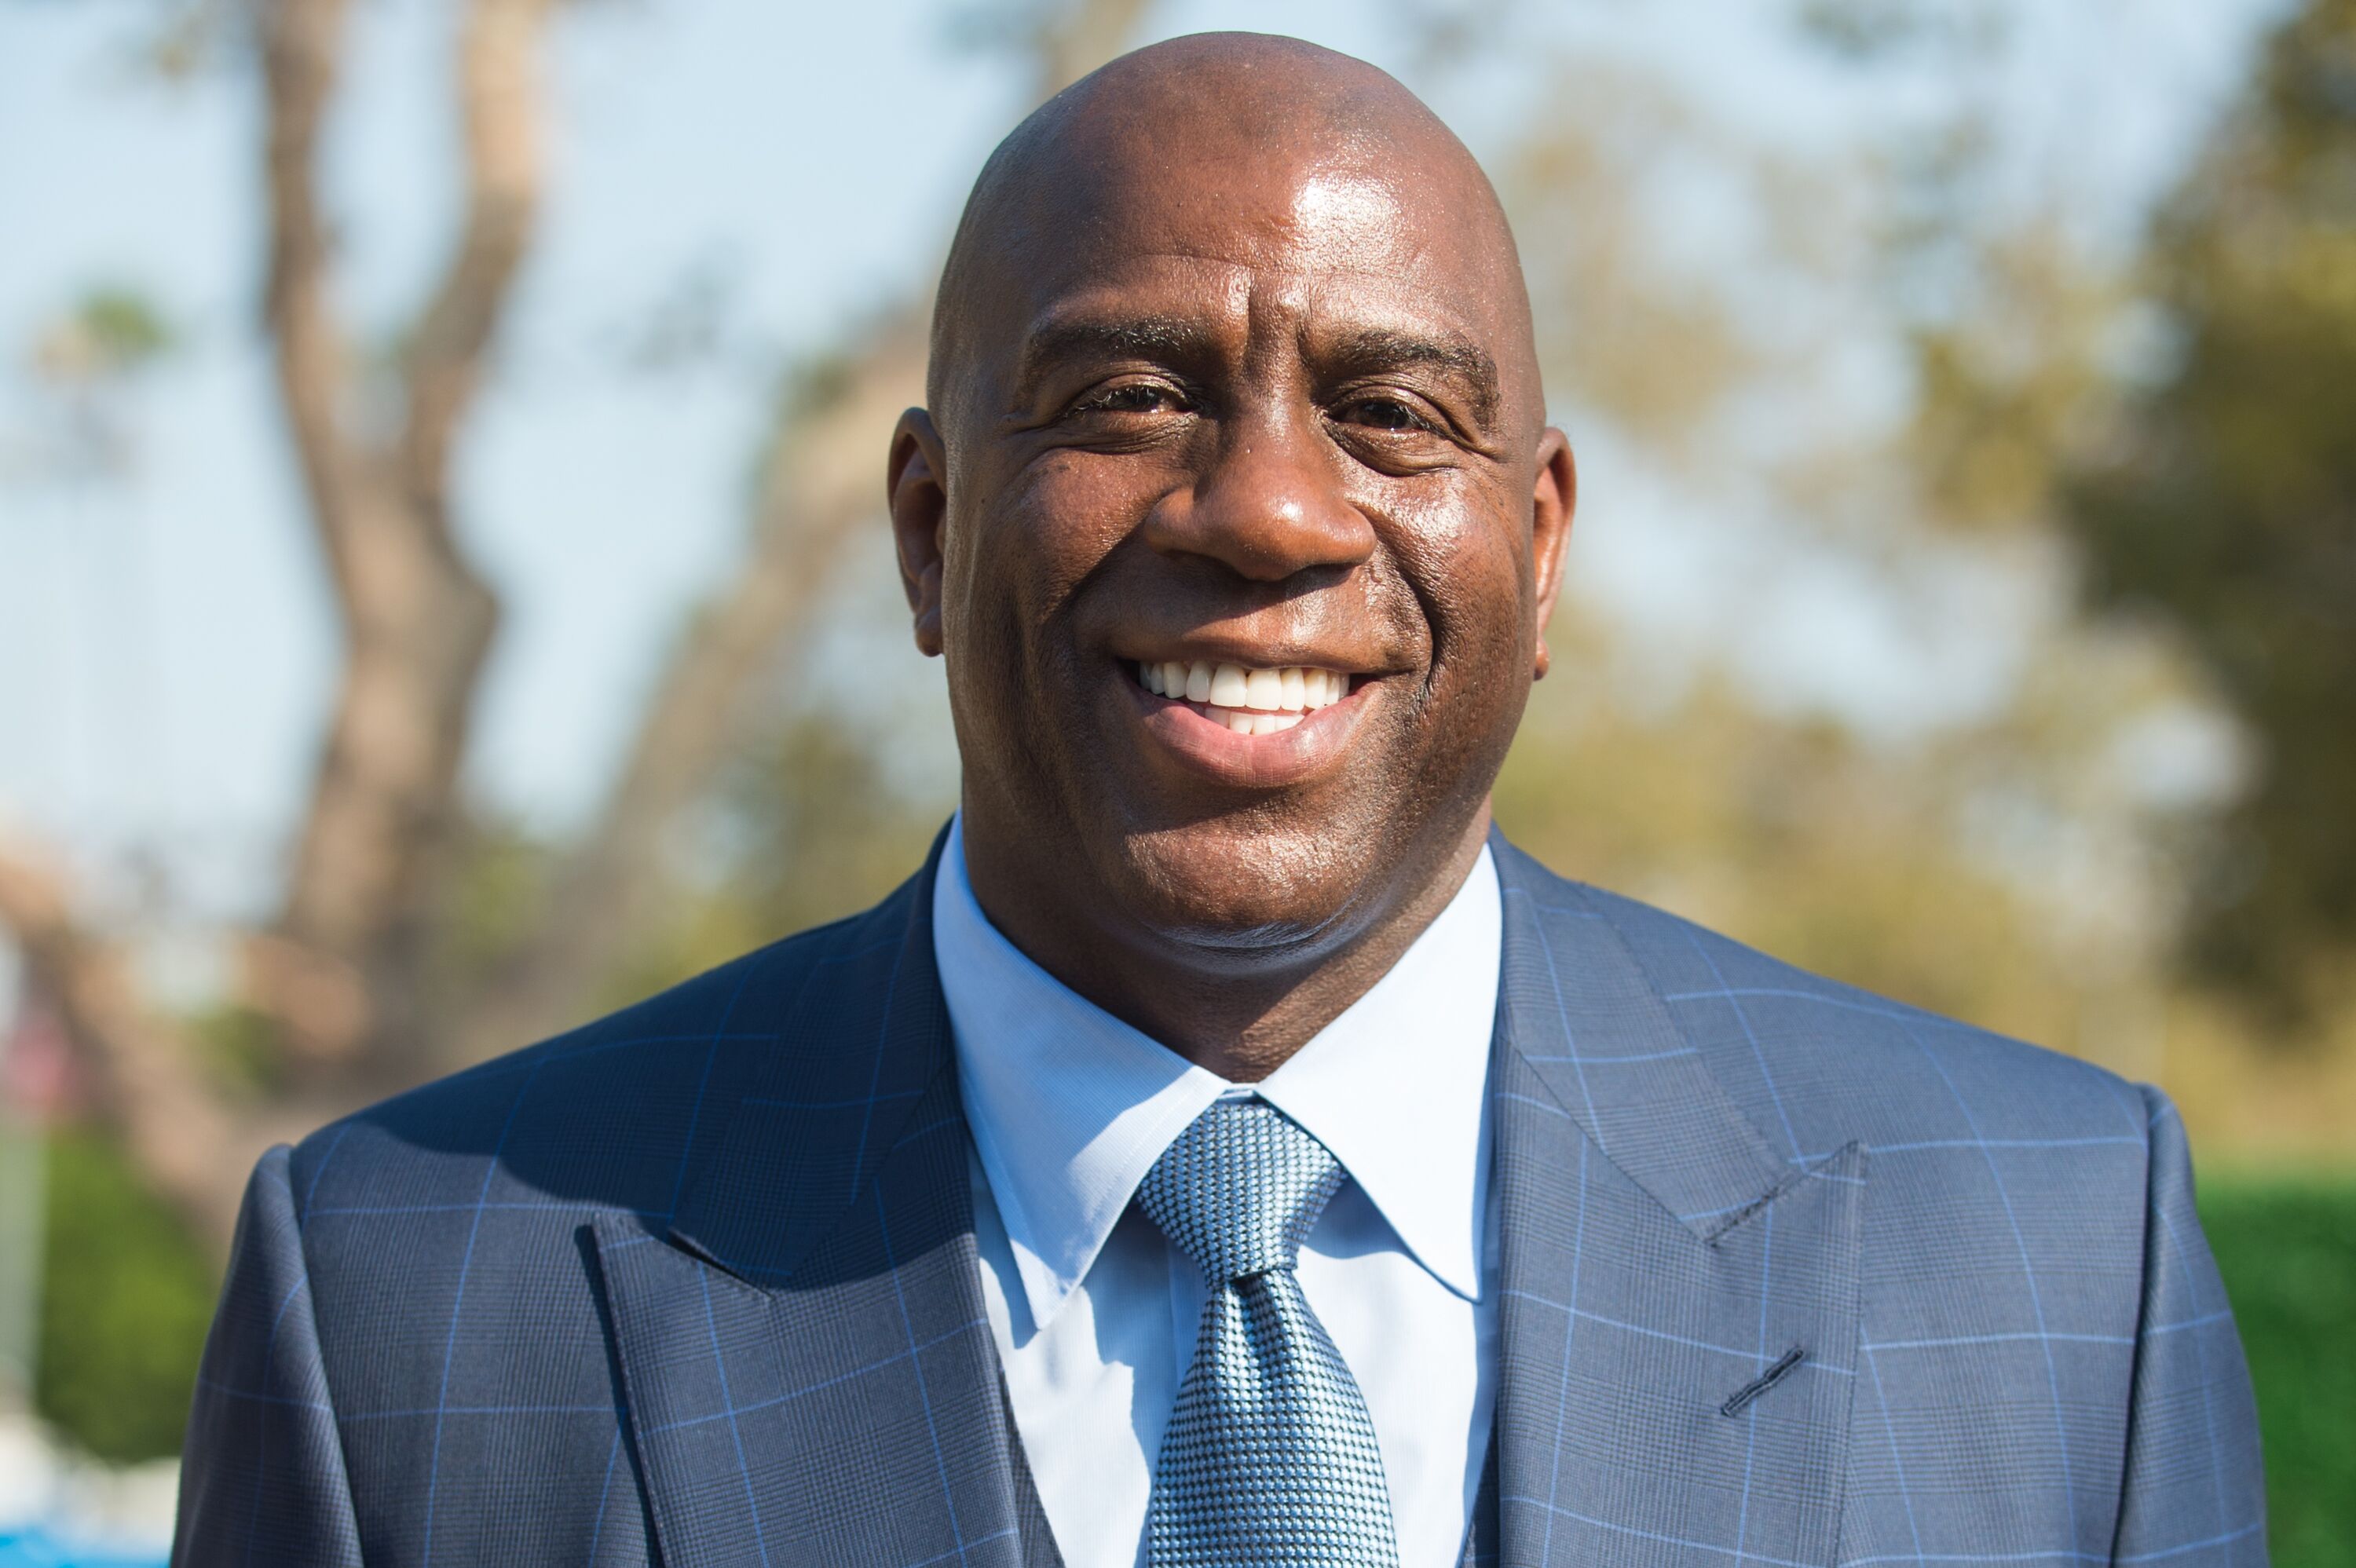 Former NBA player Earvin 'Magic' Johnson attends the Los Angeles Football Club stadium groundbreaking ceremony on August 23, 2016 in Los Angeles, California | Photo: Getty Images